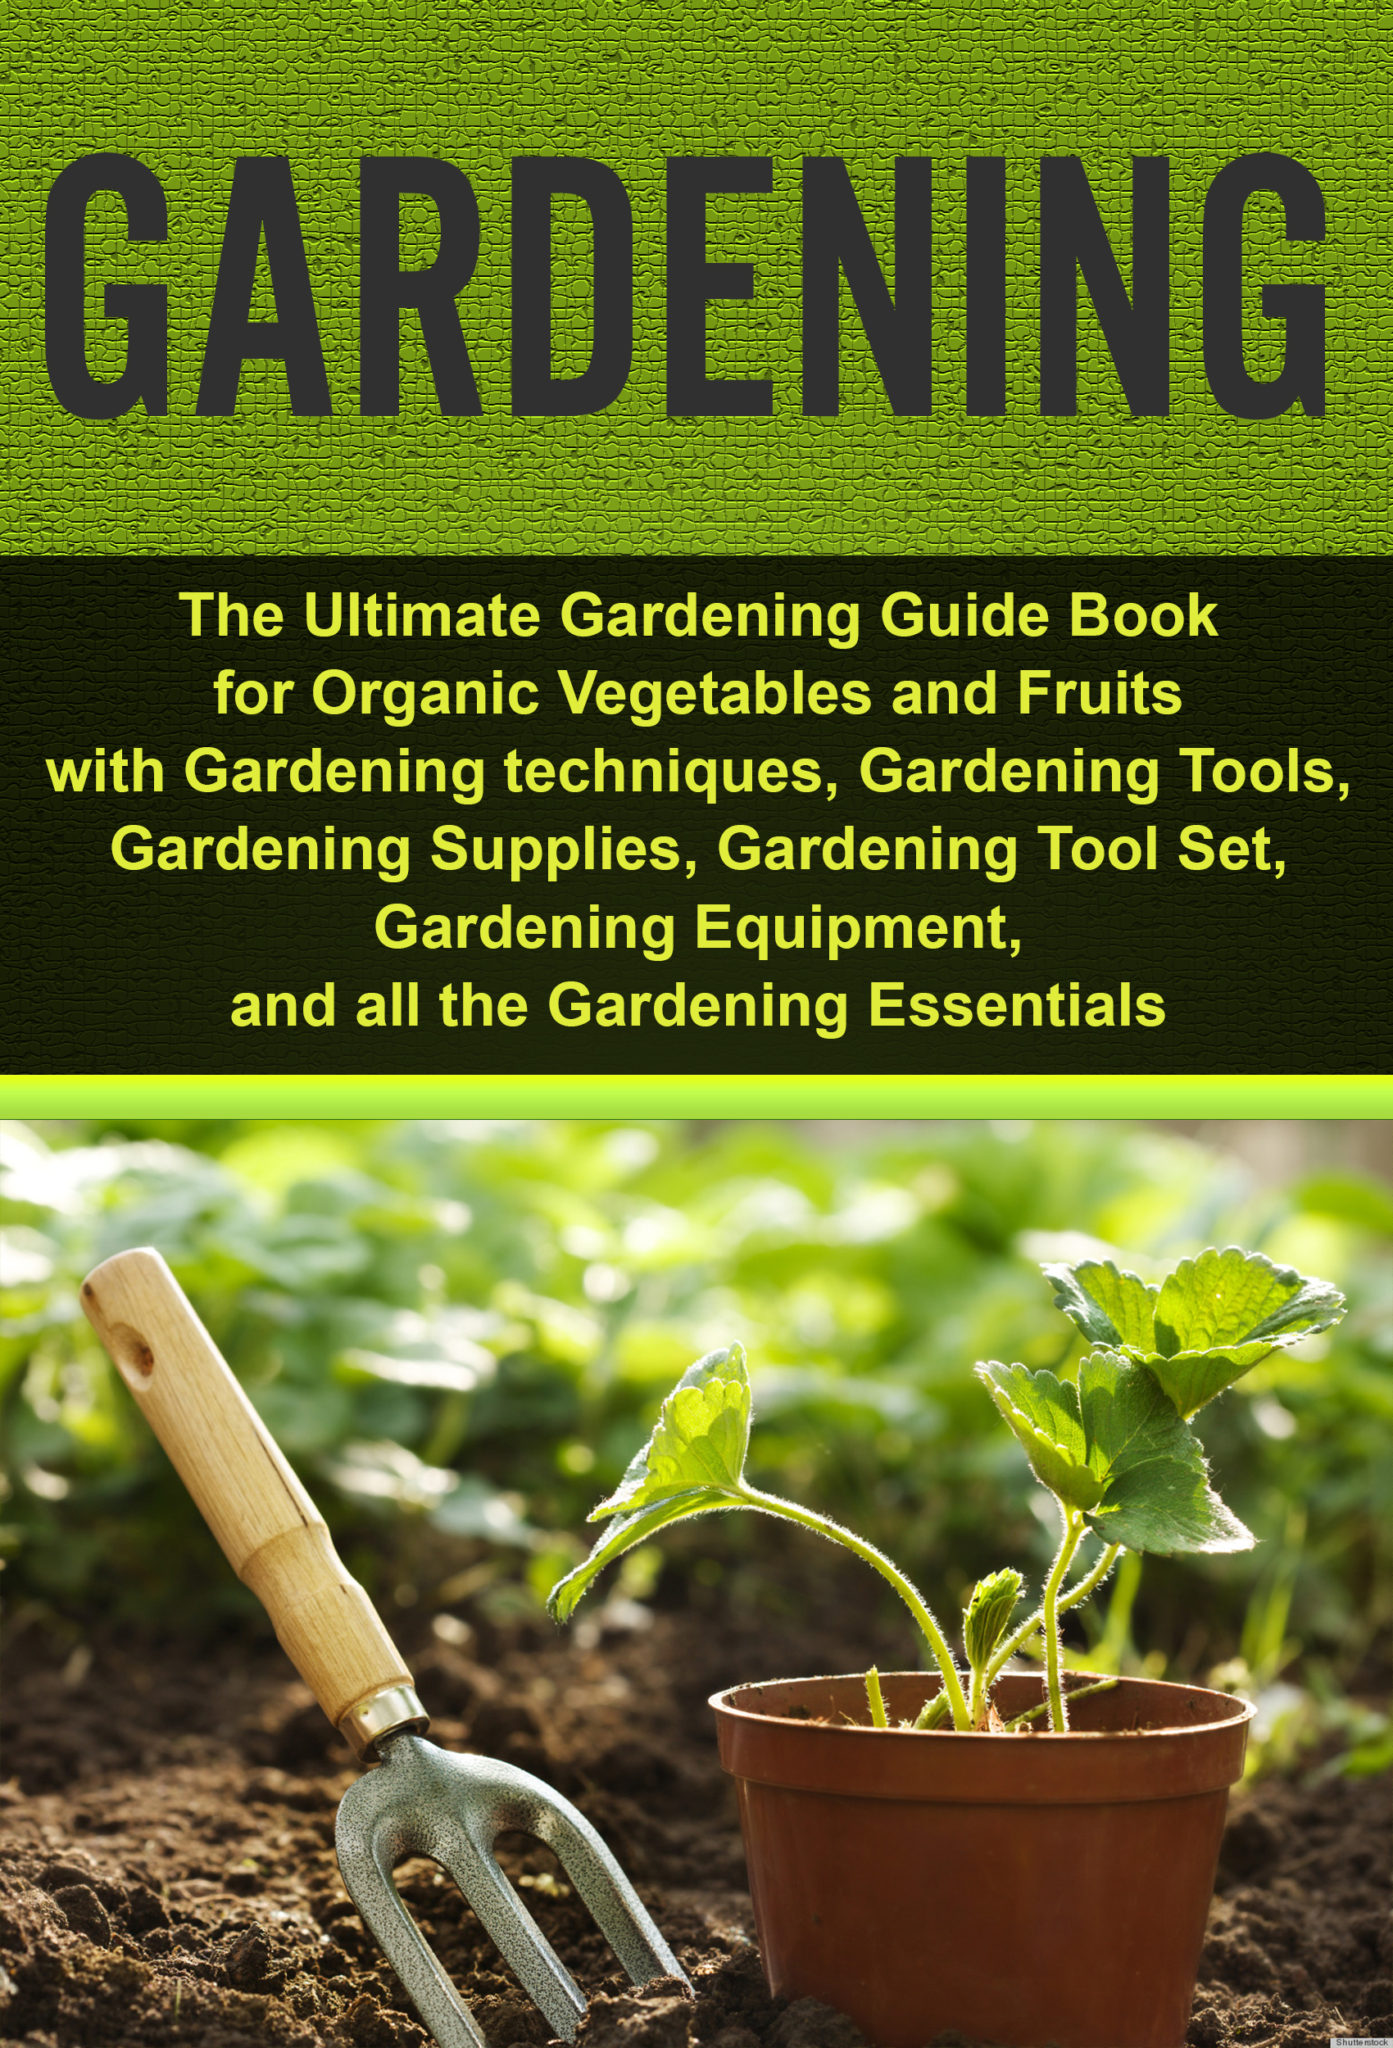 FREE: Gardening: Ultimate Gardening Guide Book for Organic Vegetables & Fruits with Gardening techniques, Gardening Tools, Gardening Supplies, Gardening Tool Set, Gardening Equipment, Gardening Essentials by Ziggie Woodworth